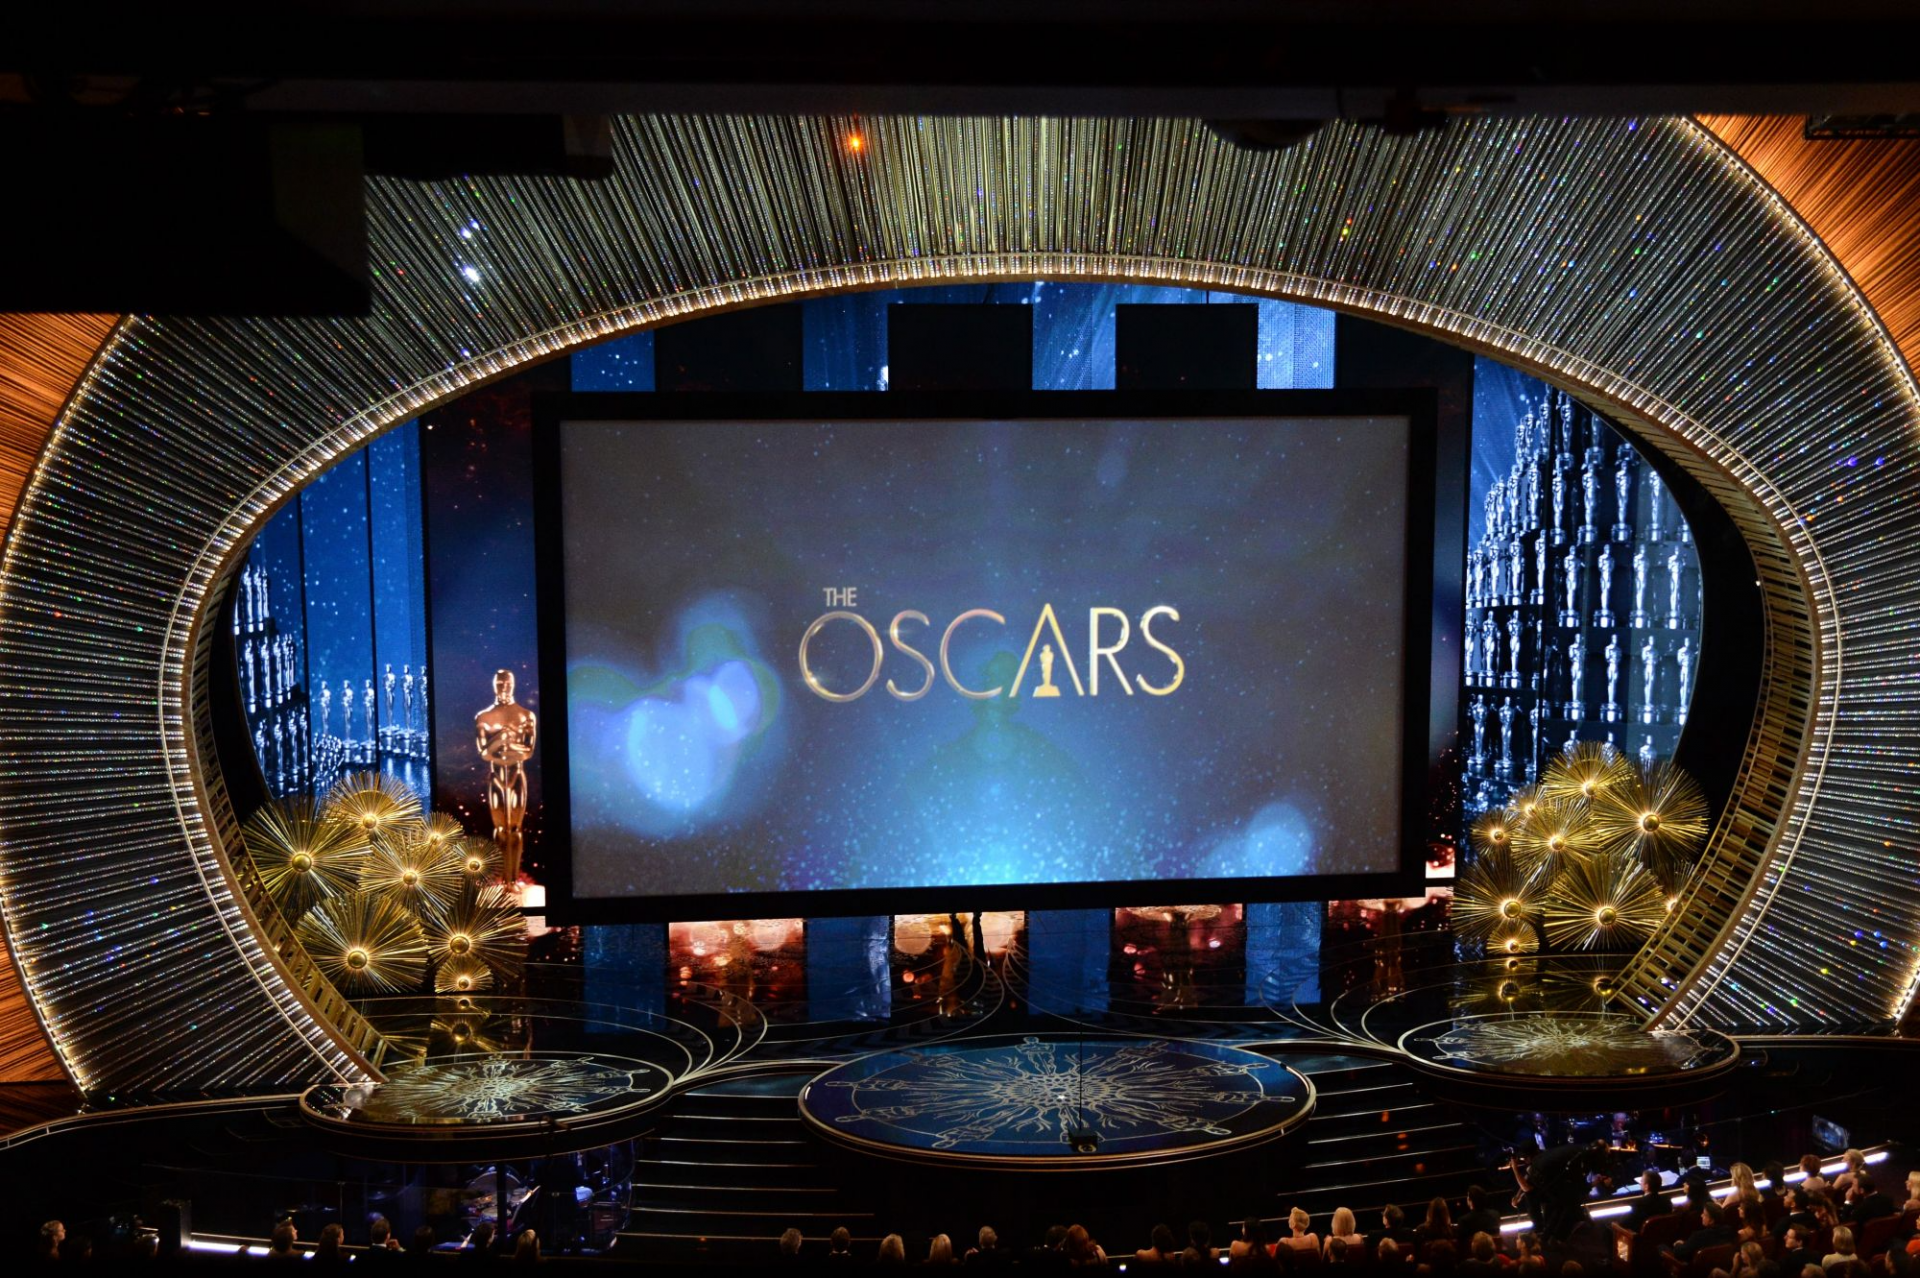 How to Watch Oscars 2021: On TV, Live Stream, Without Cable?